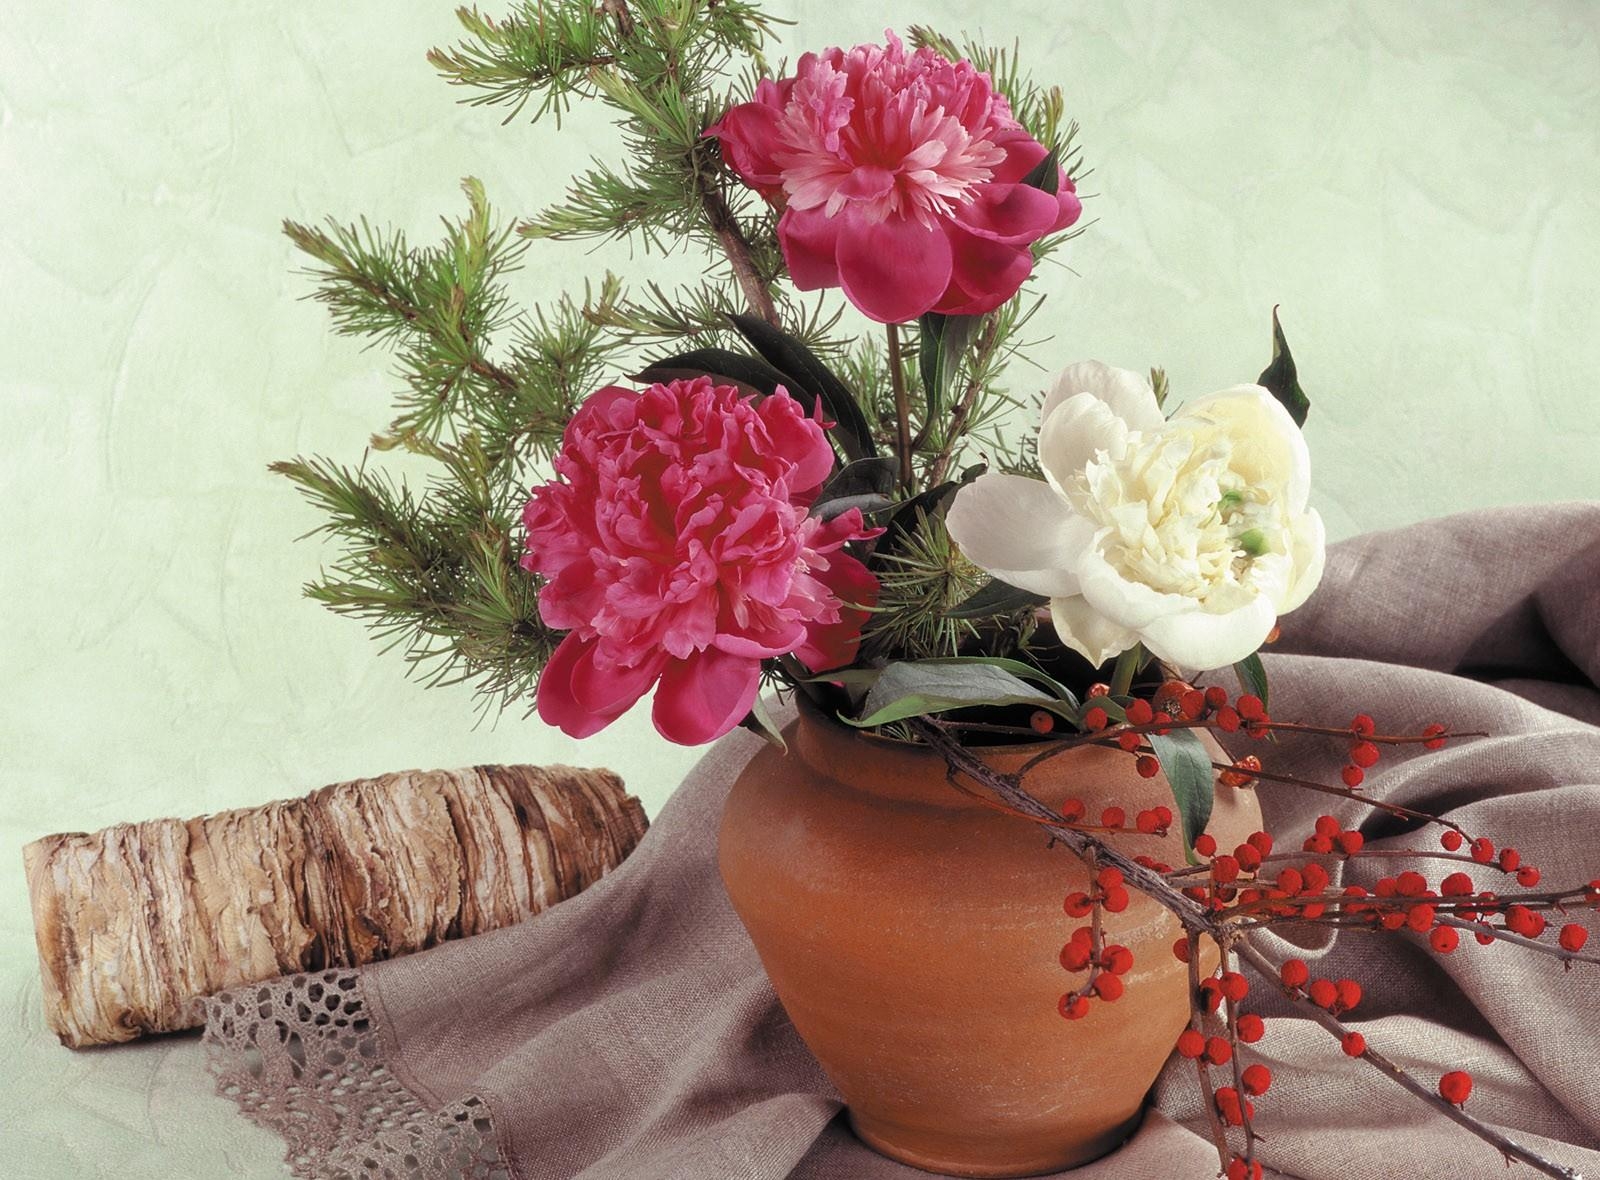 flowers, peonies, berries, branch, needles, pot, log, tablecloth High Definition image